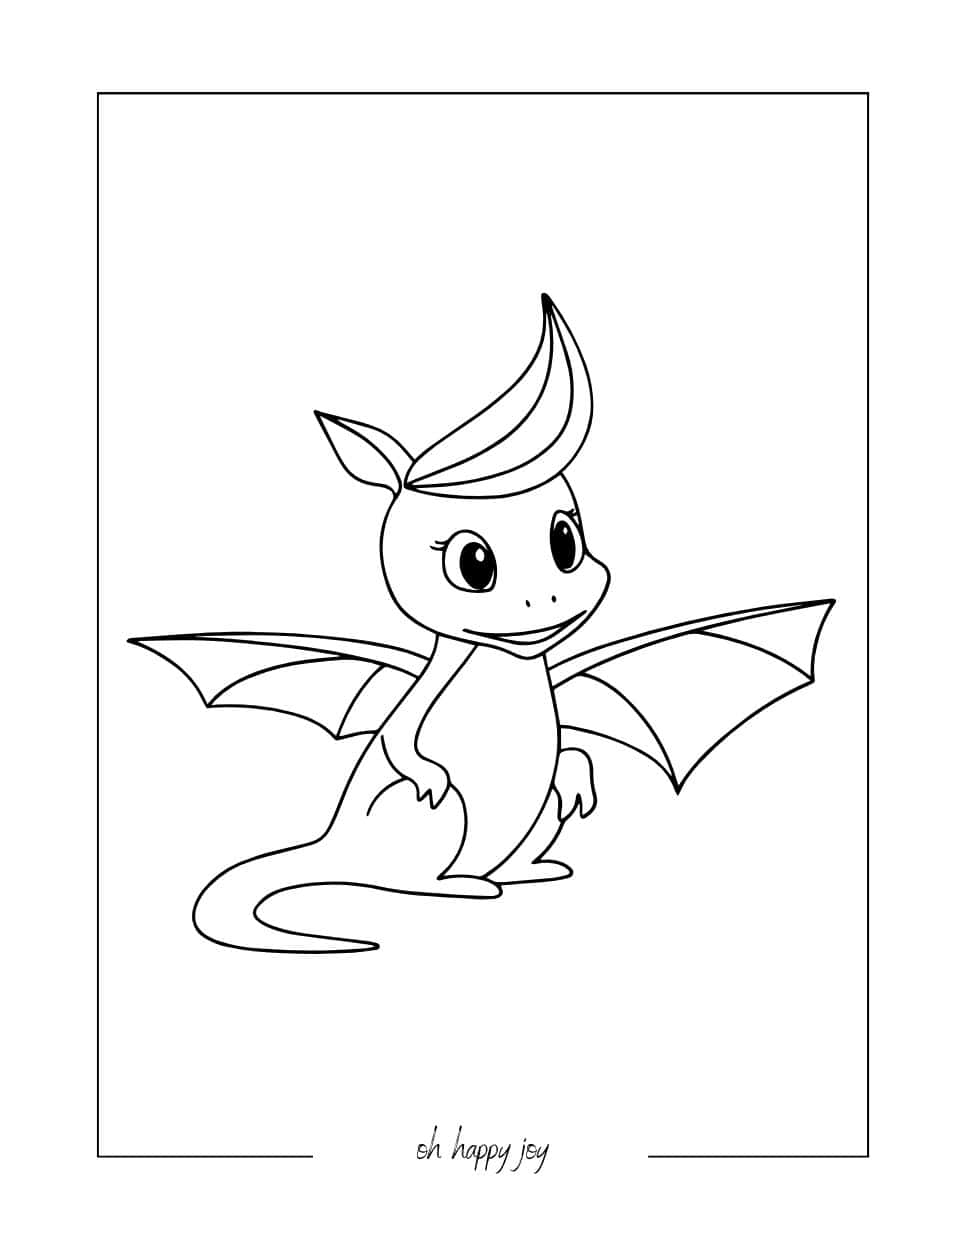 Short-Haired Dragon Coloring Page